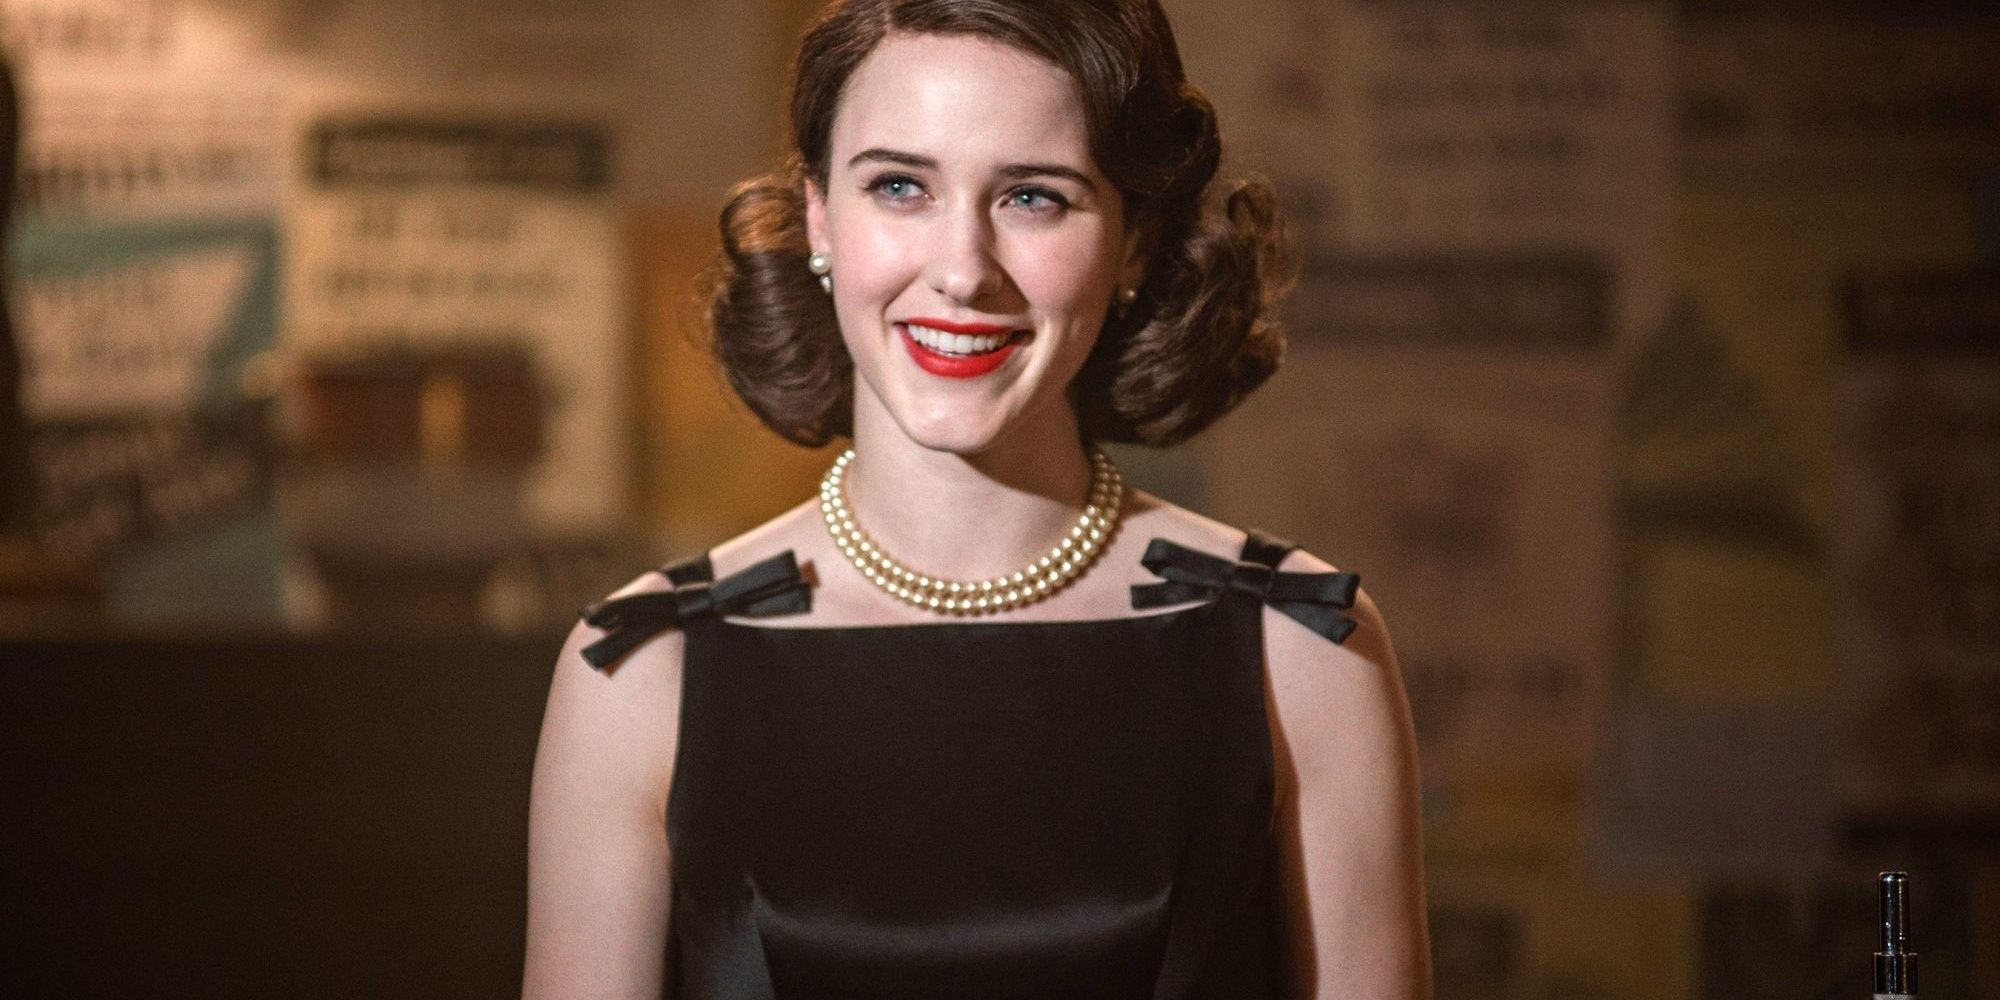 Rachel Brosnahan on stage in The Marvelous Mrs. Maisel 